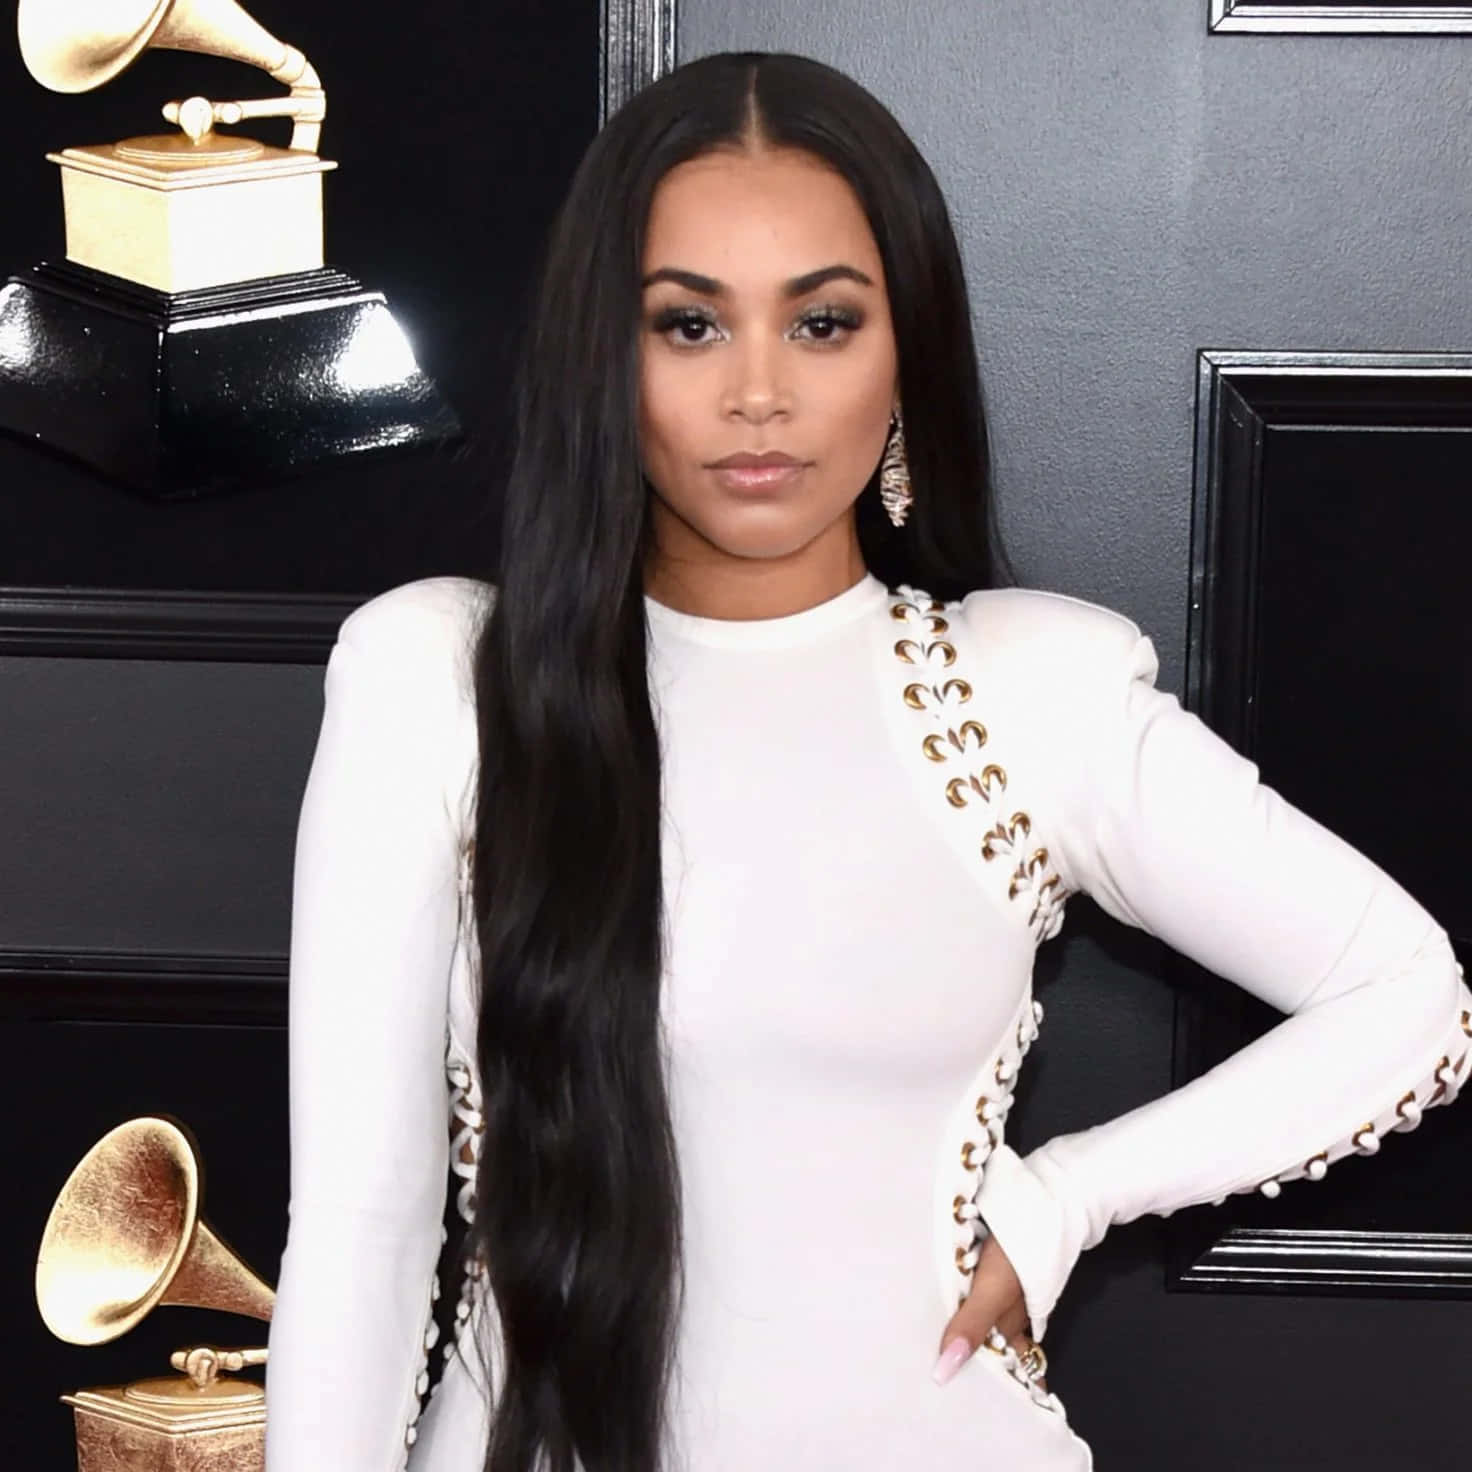 Lauren London pays tribute to Nipsey Hussle on anniversary of his death